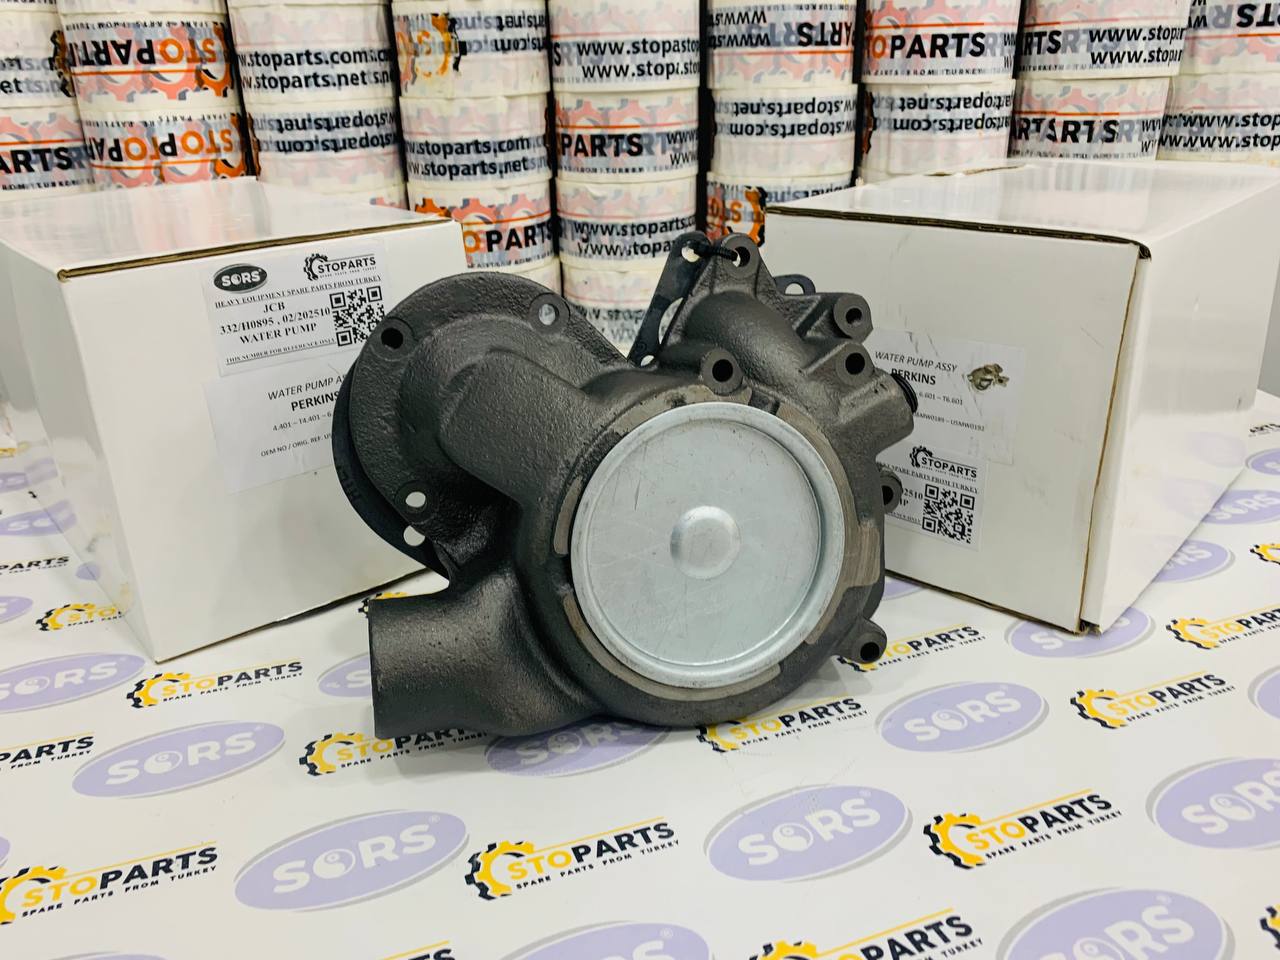 WATER PUMP 332/H0895, 02/202510 FOR JCB